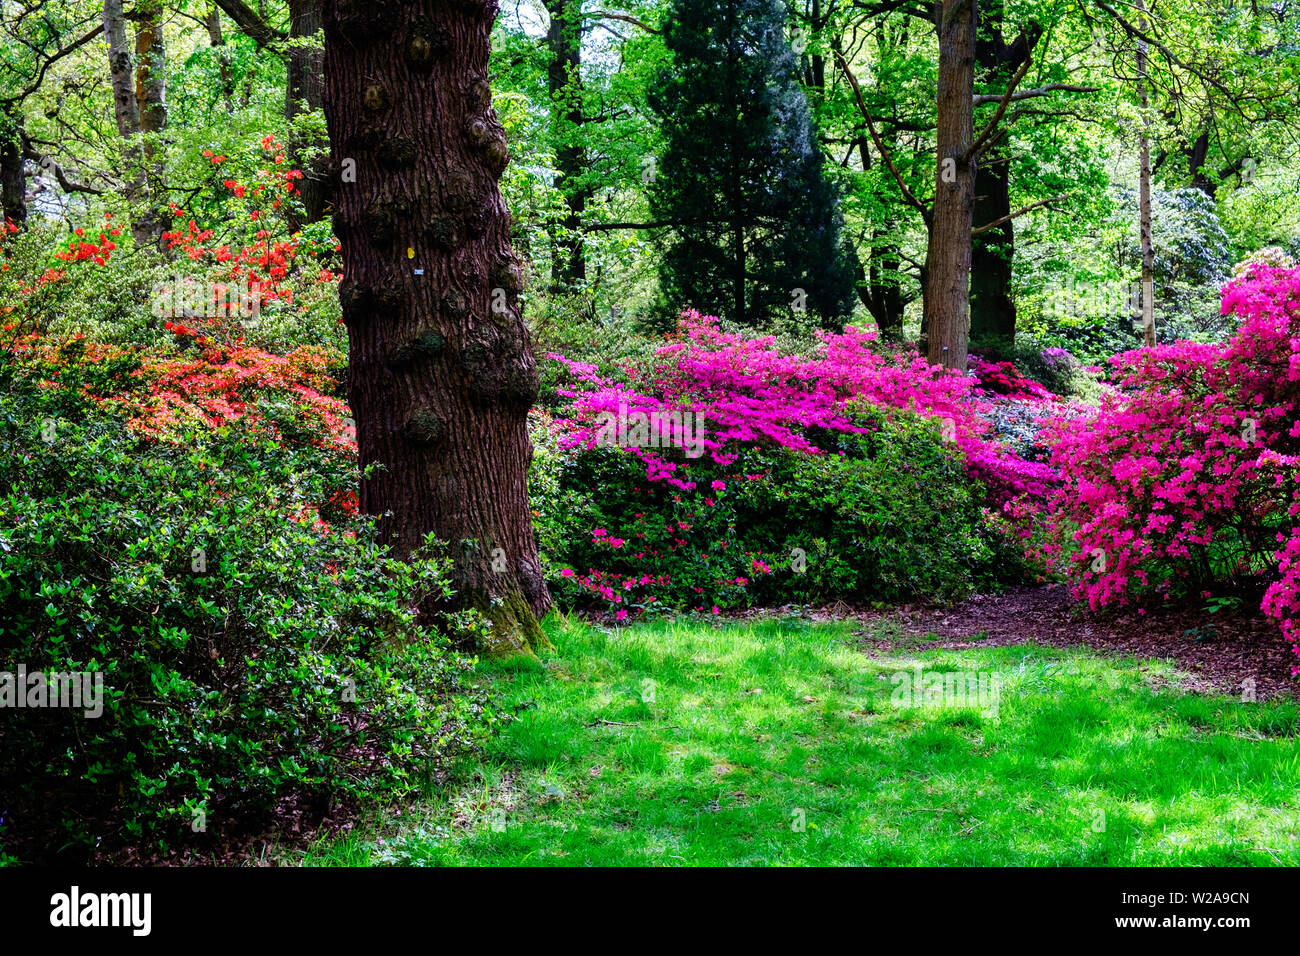 Grassy woodland with trees & shrubs of purple & red flowers in the Spring at Isabella Plantation in Richmond Park, Southwest London, England. Stock Photo